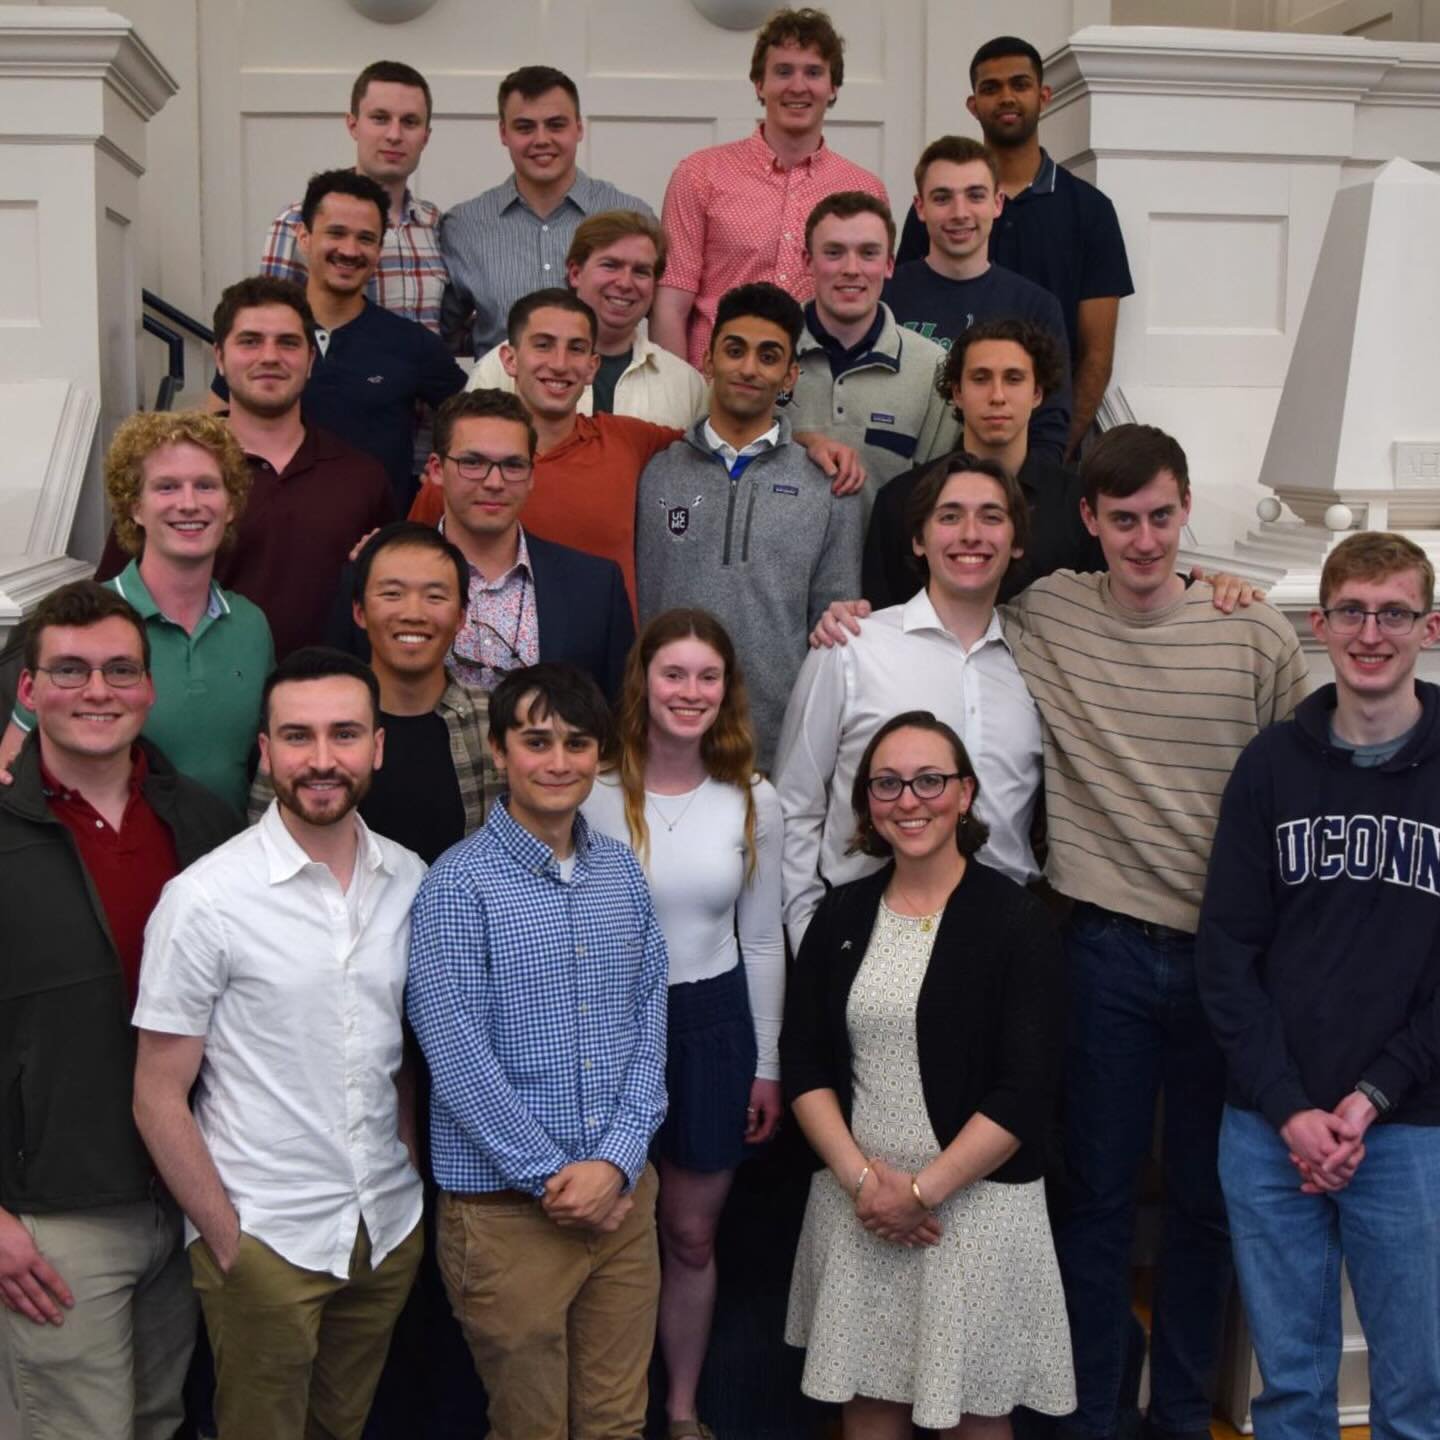 Following our Alumni Row, on May 11, we hosted our annual Banquet! Food, socialization, and chocolate bars provided to us by @munsons_chocolates accompanied our night of speeches, gifts, and awards. Special thanks to all of our alumni, friends, and f